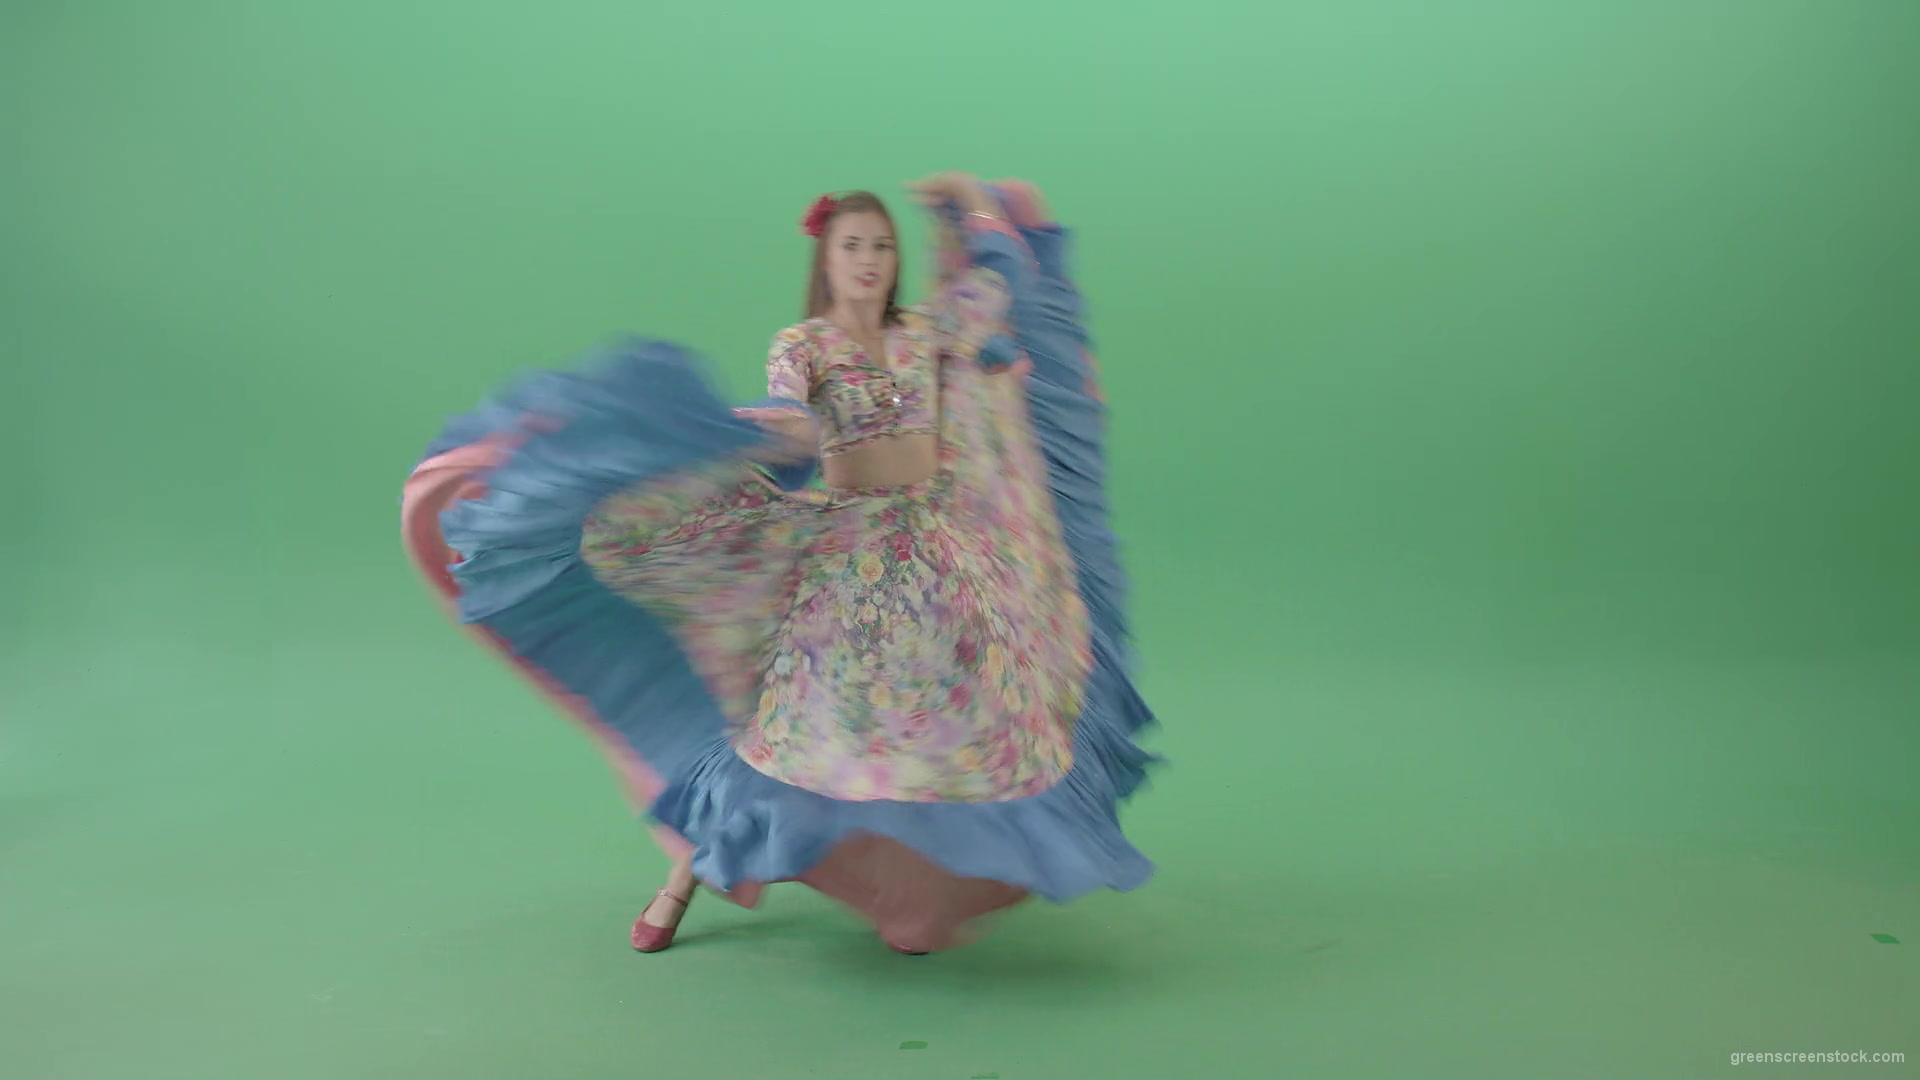 Elegant-movement-by-Gypsy-girl-in-moldova-costume-isolated-on-green-screen-4K-Video-Footage-clip-1920_005 Green Screen Stock